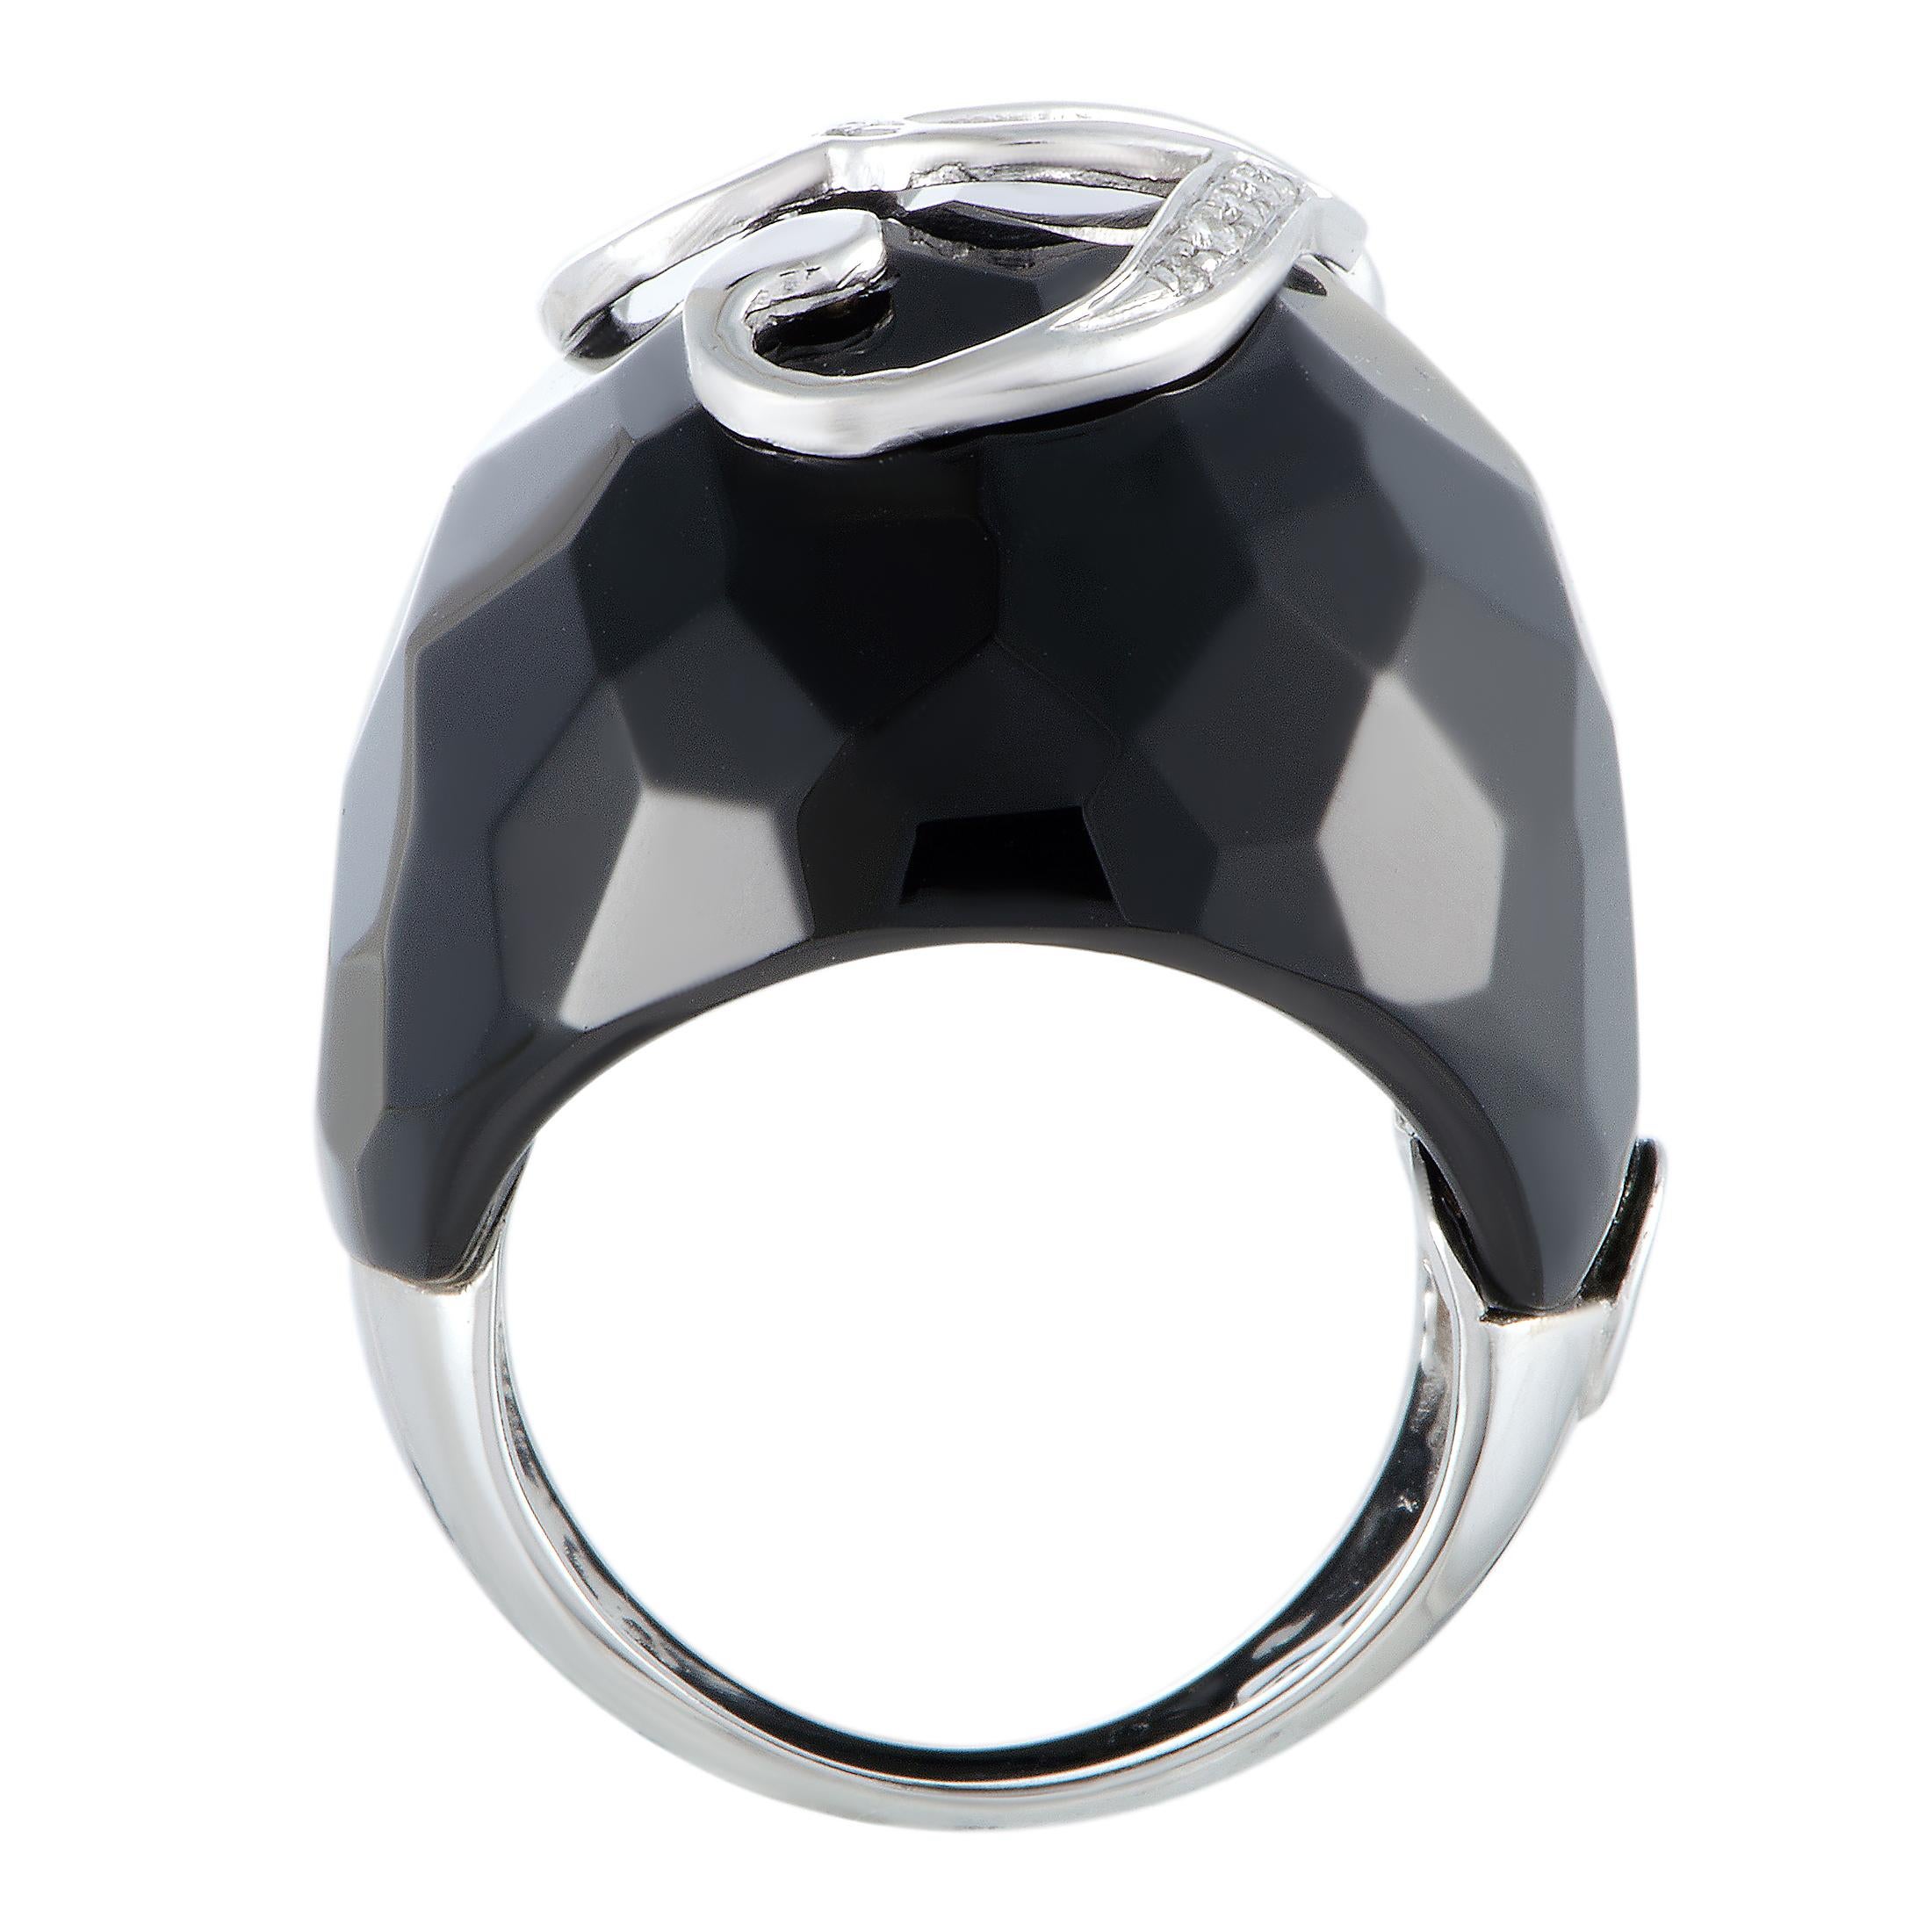 This spectacular ring offers an exceptionally fashionable appearance thanks to the prestigious blend of white gold and diamonds that beautifully brings out the striking color of the expertly cut onyx. The ring is a G. Fiorini design and it is